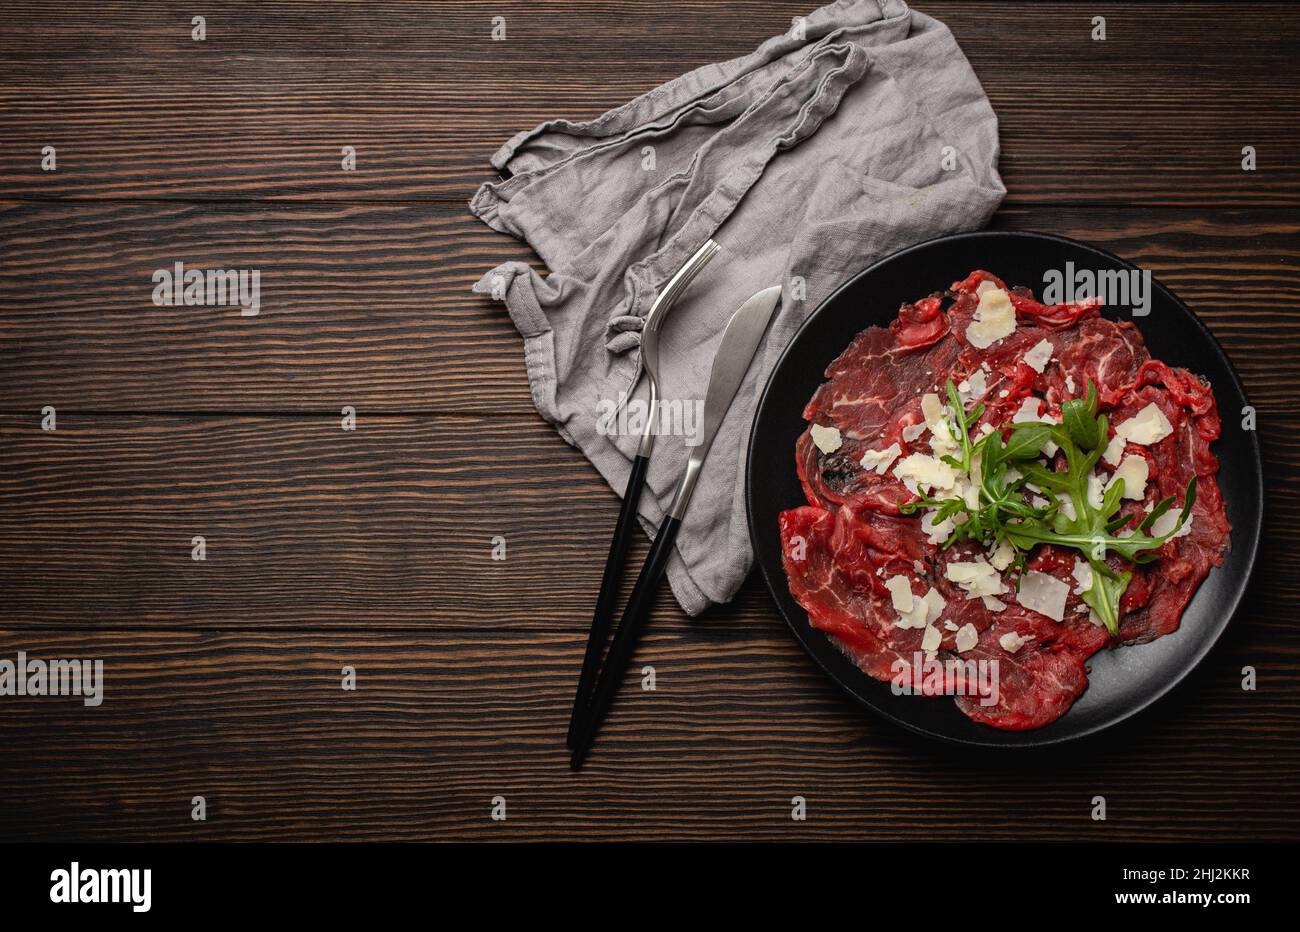 Cold meat appetizer Beef carpaccio with parmesan cheese and arugula on black plate Stock Photo